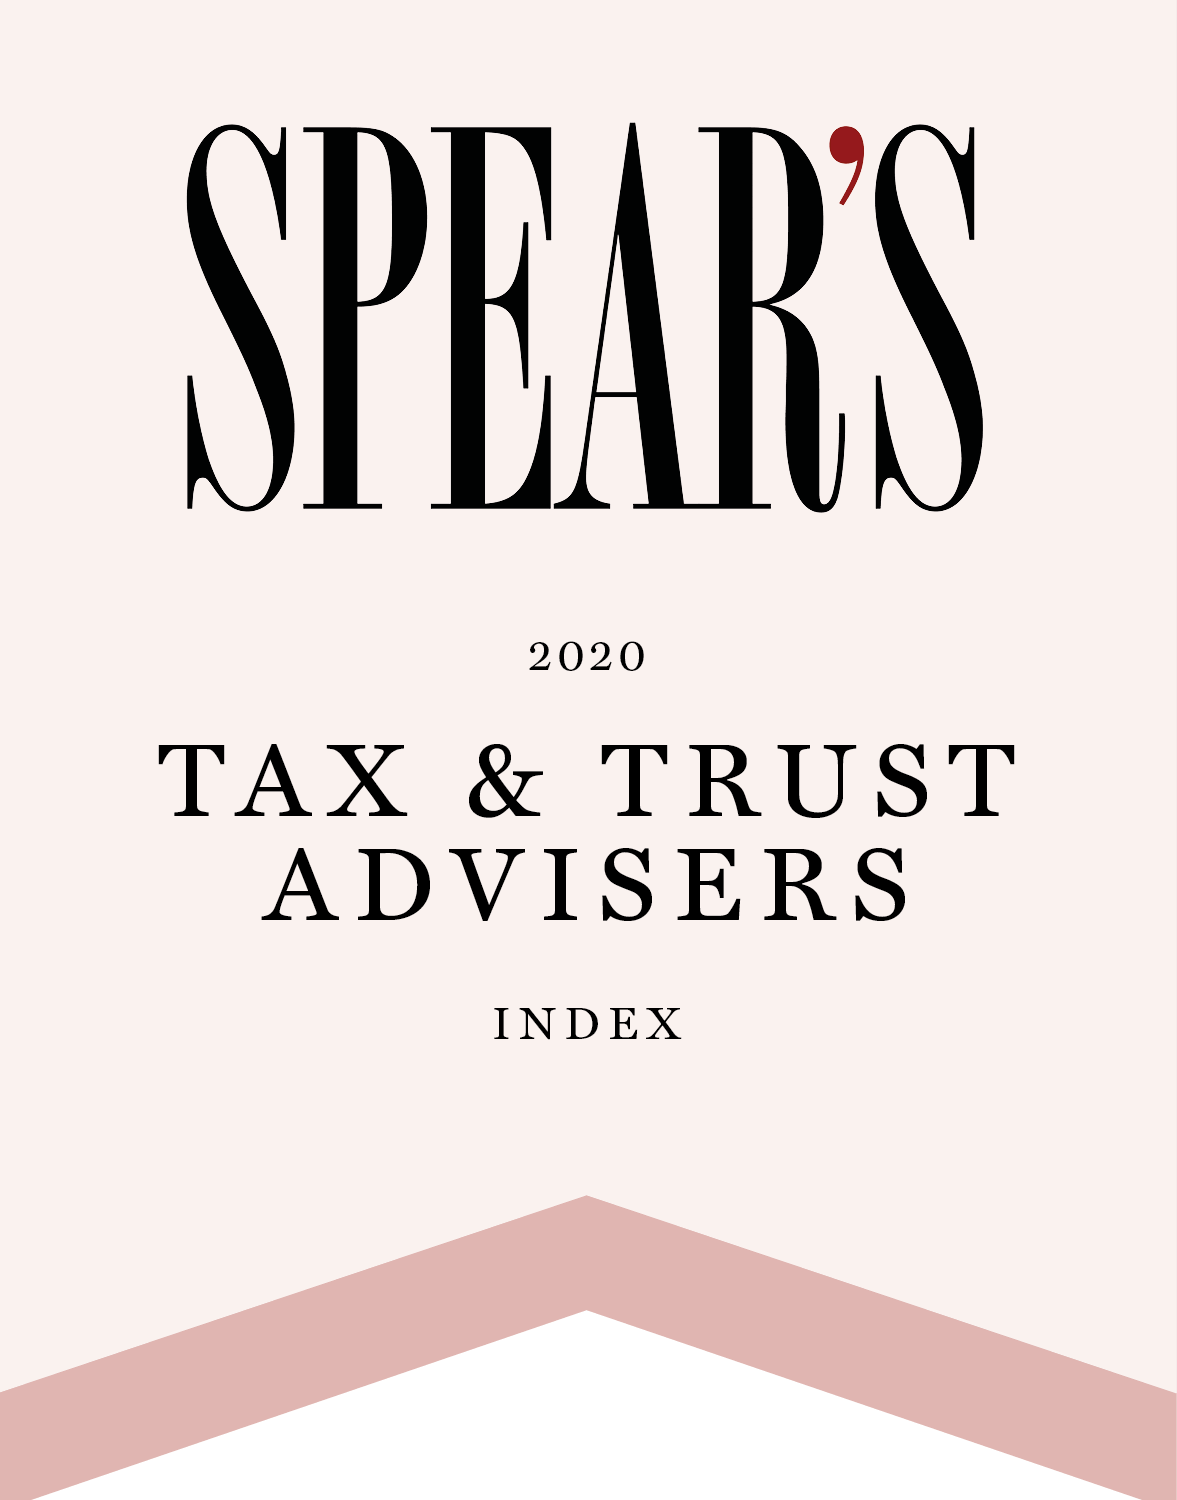 Catherine Hill and Emma White recognised in the 2020 Spear's Tax & Trust Advisers Index